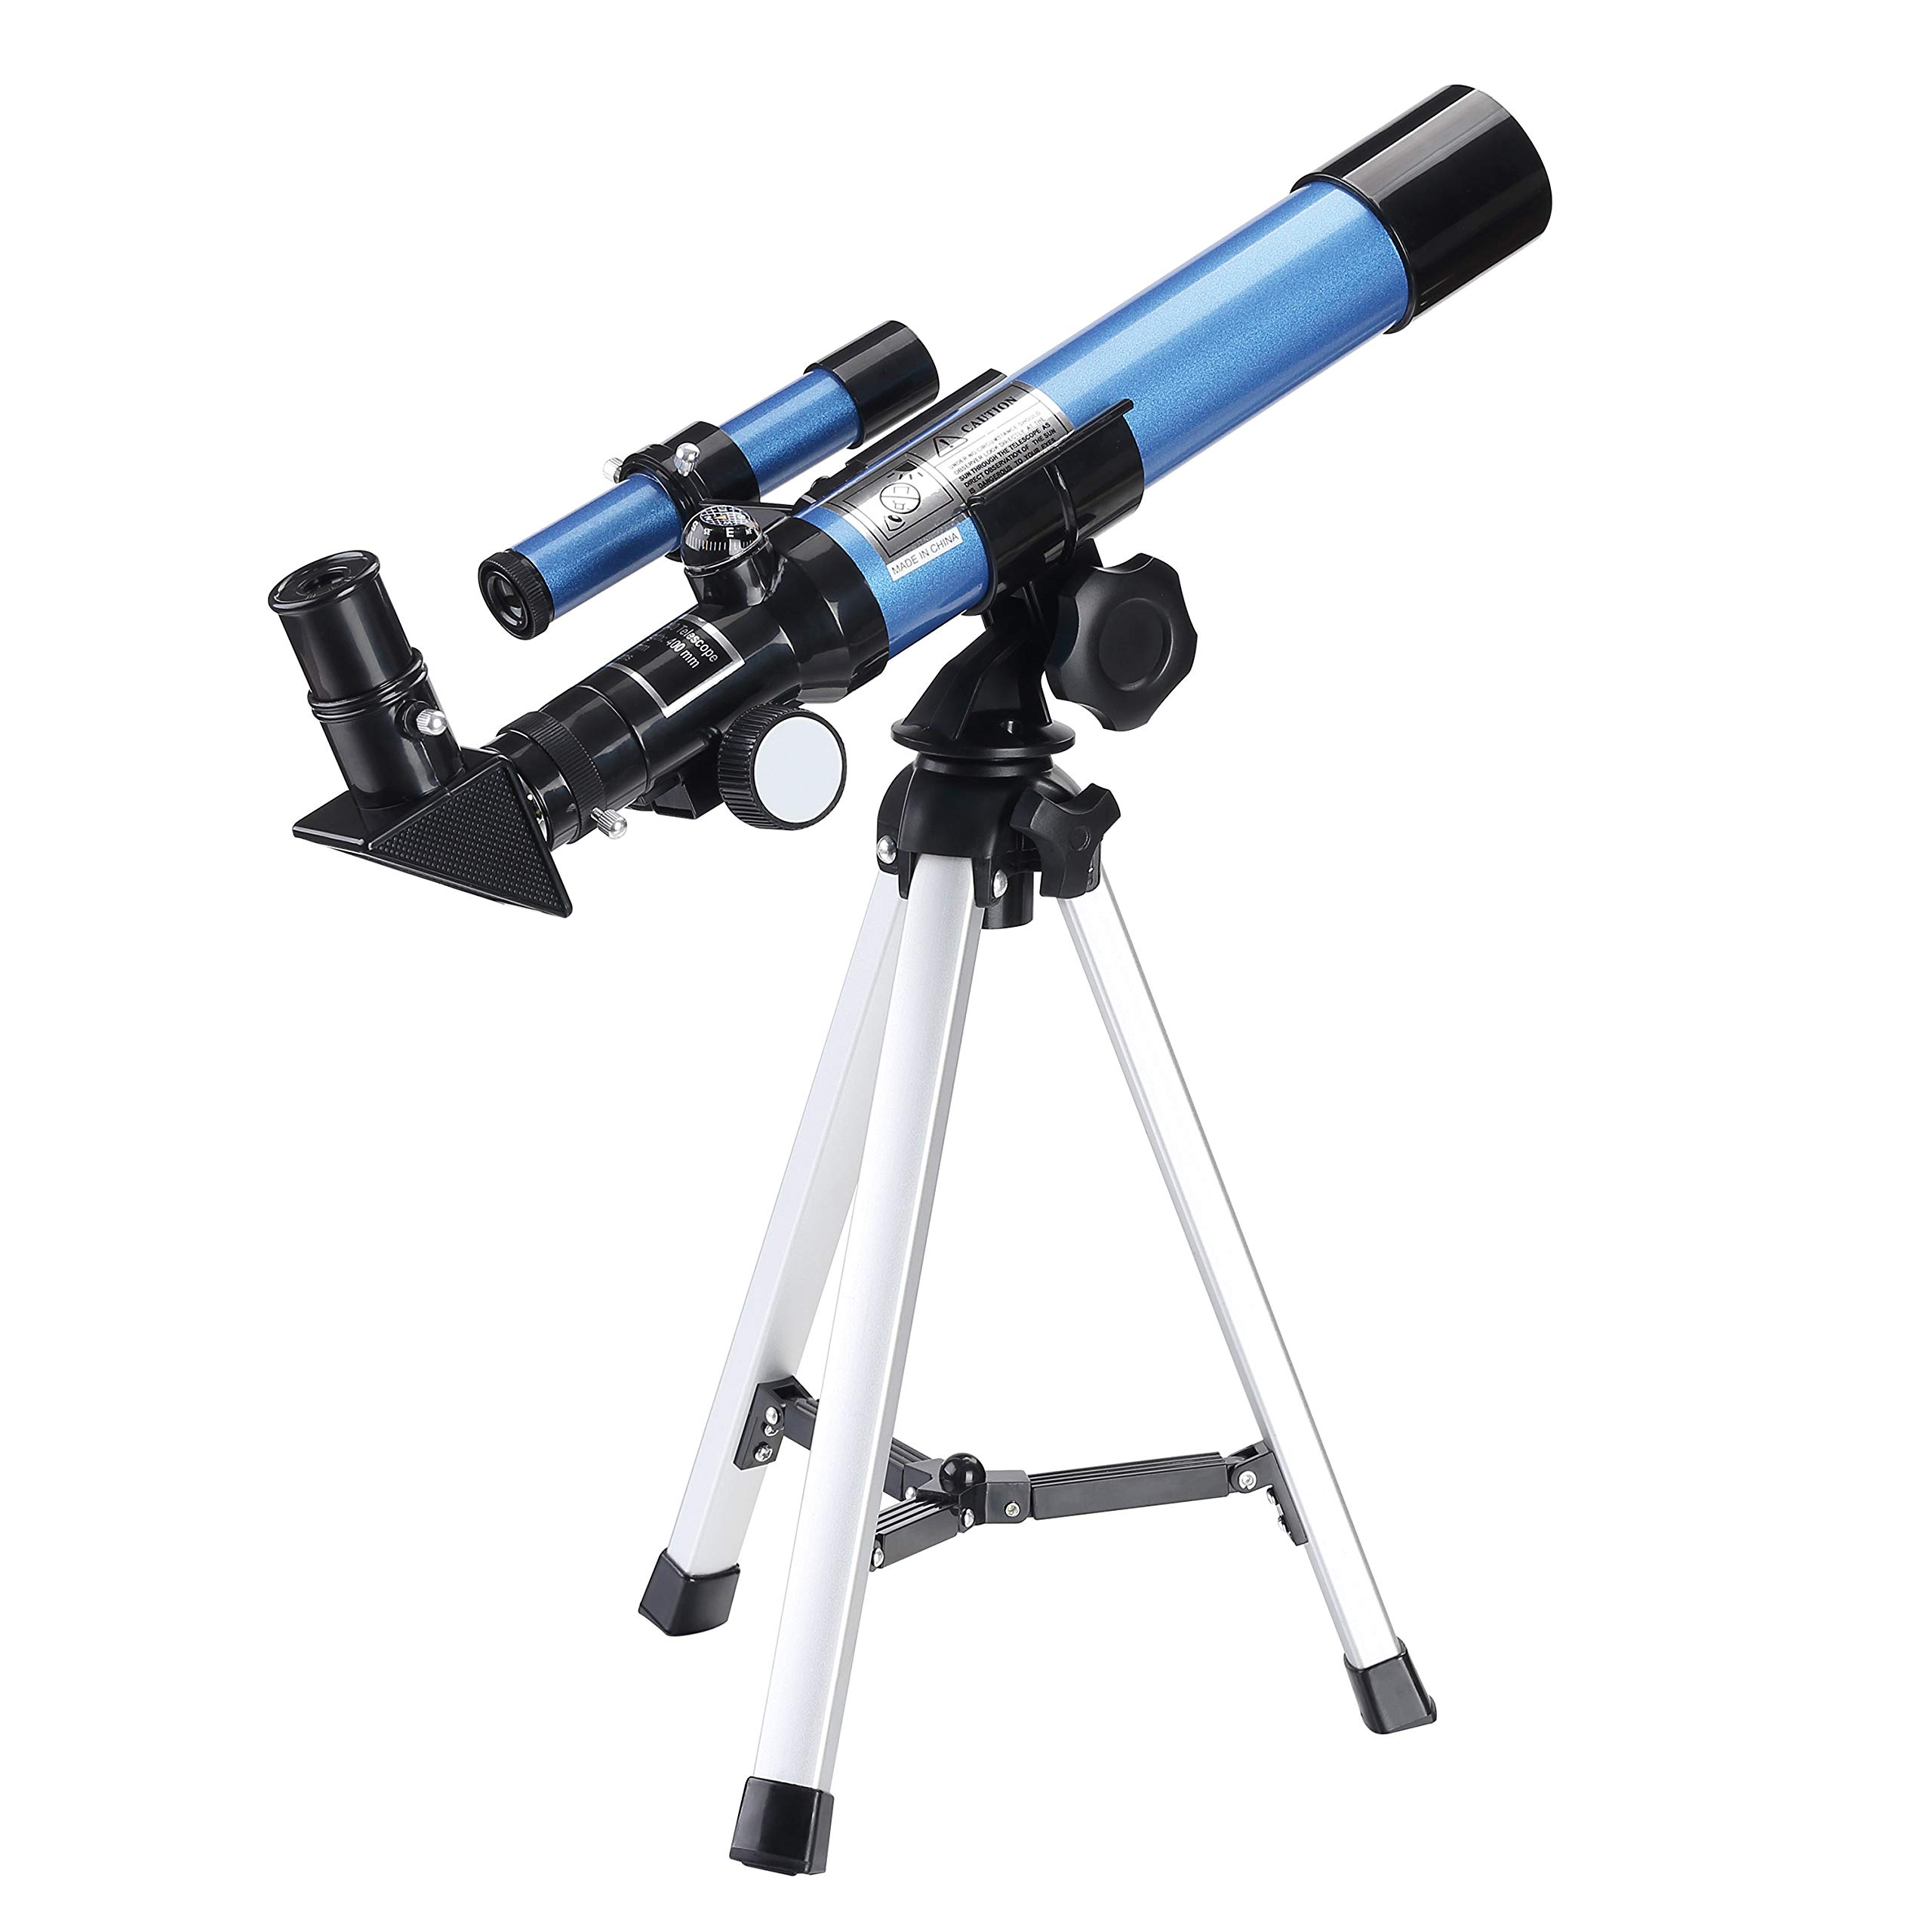 AOMEKIE 40070 Telescopes for Astronomy Beginners Kids and Adults 70mm Astronomical Telescopes with Adjustable Tripod K6/25 Eyepieces Phone Adapter